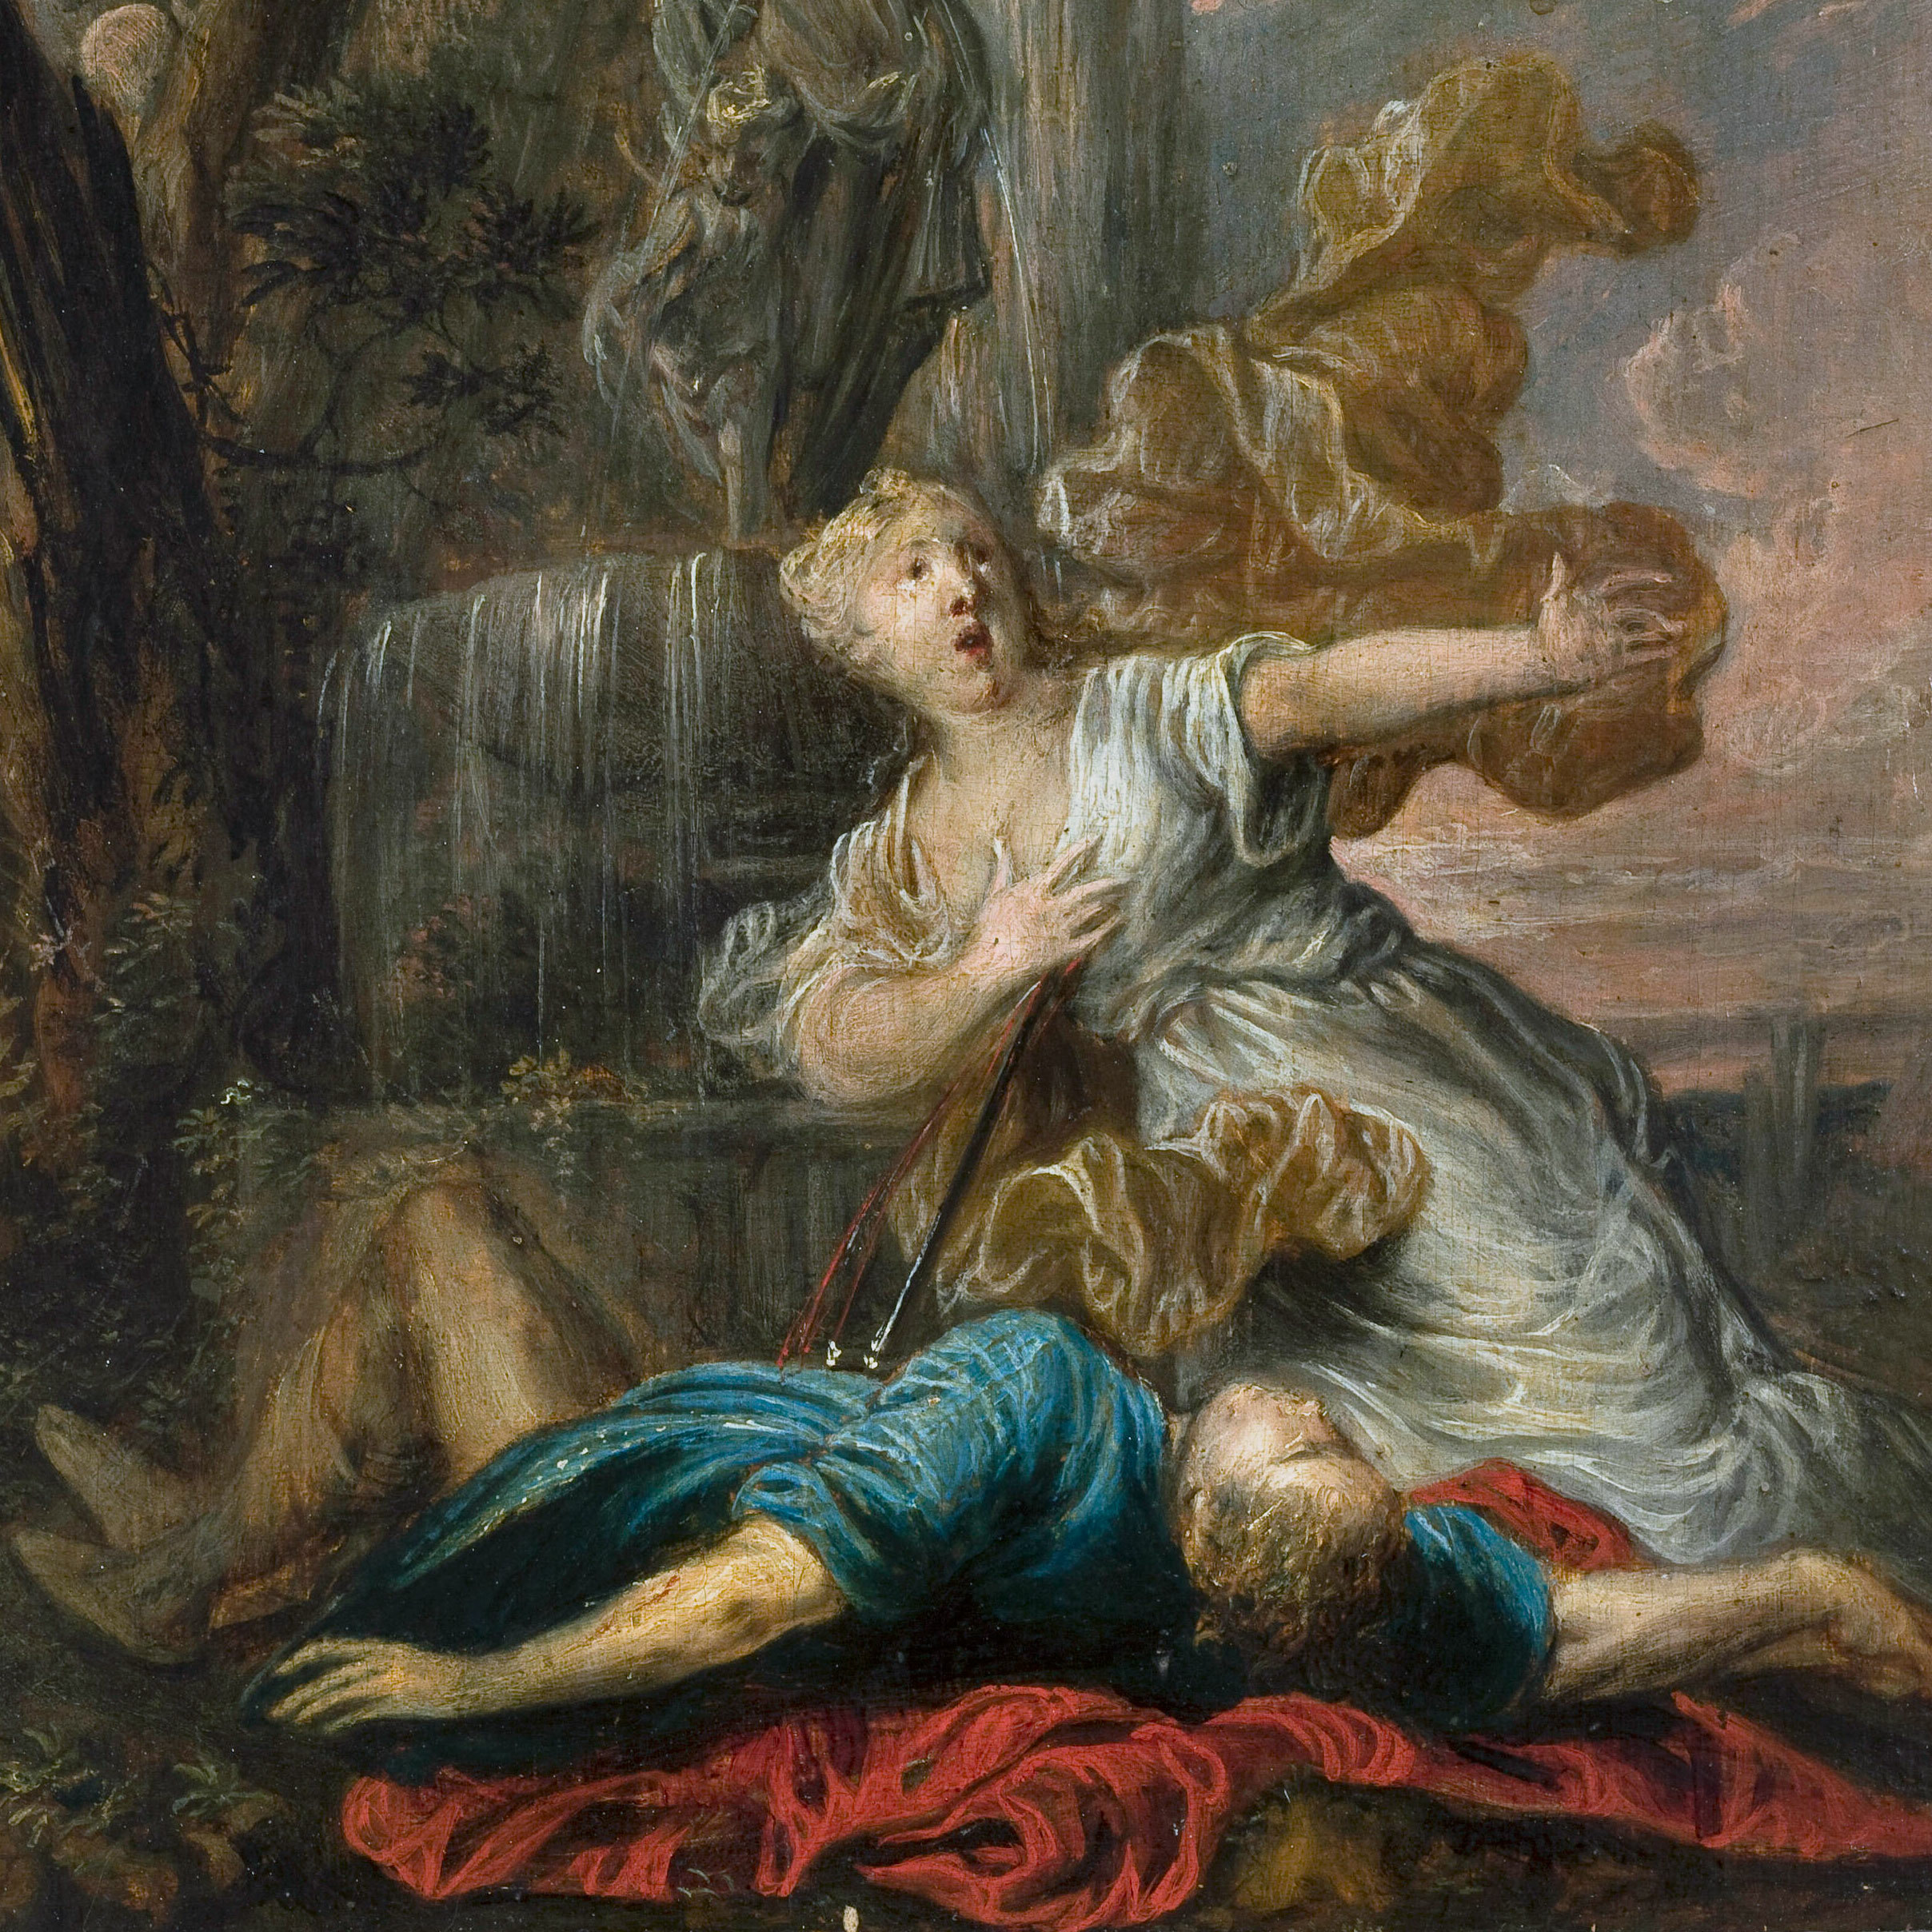 Painting of a distressed woman kneeling over the prone body of a man. In the background is a marble fountain featuring a cupid sculpture.